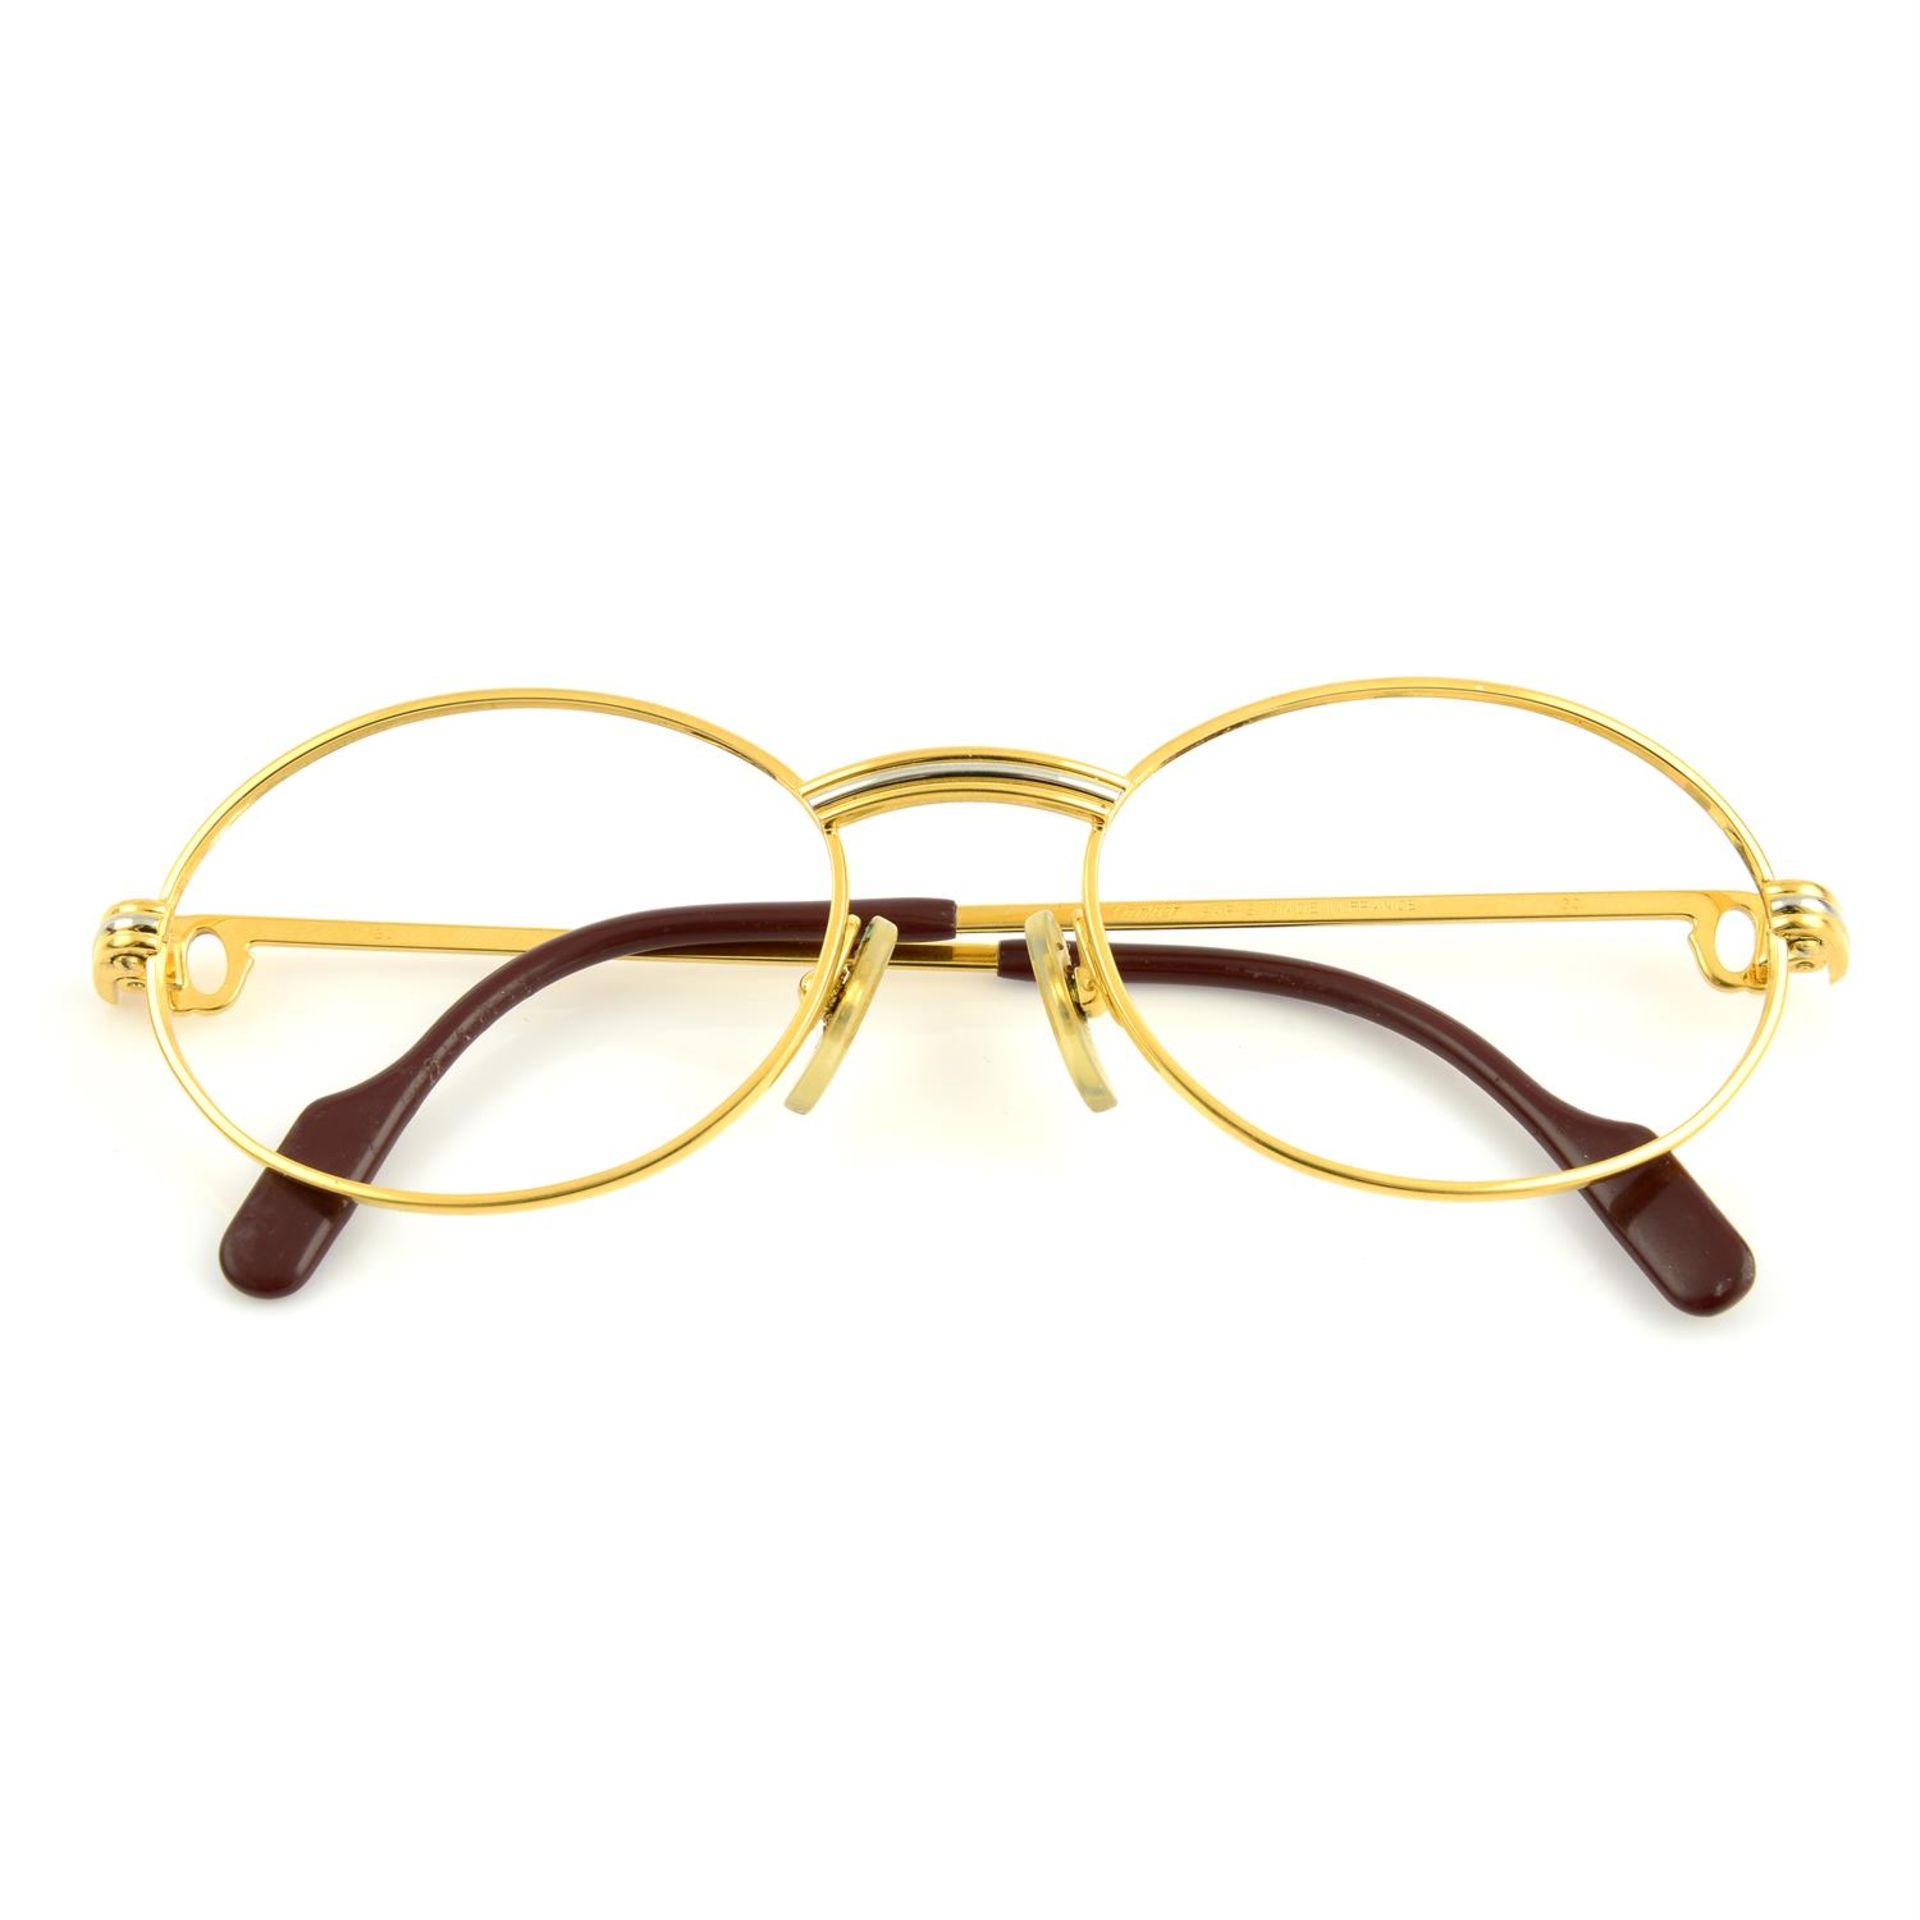 CARTIER - a pair of Tank glasses frames.